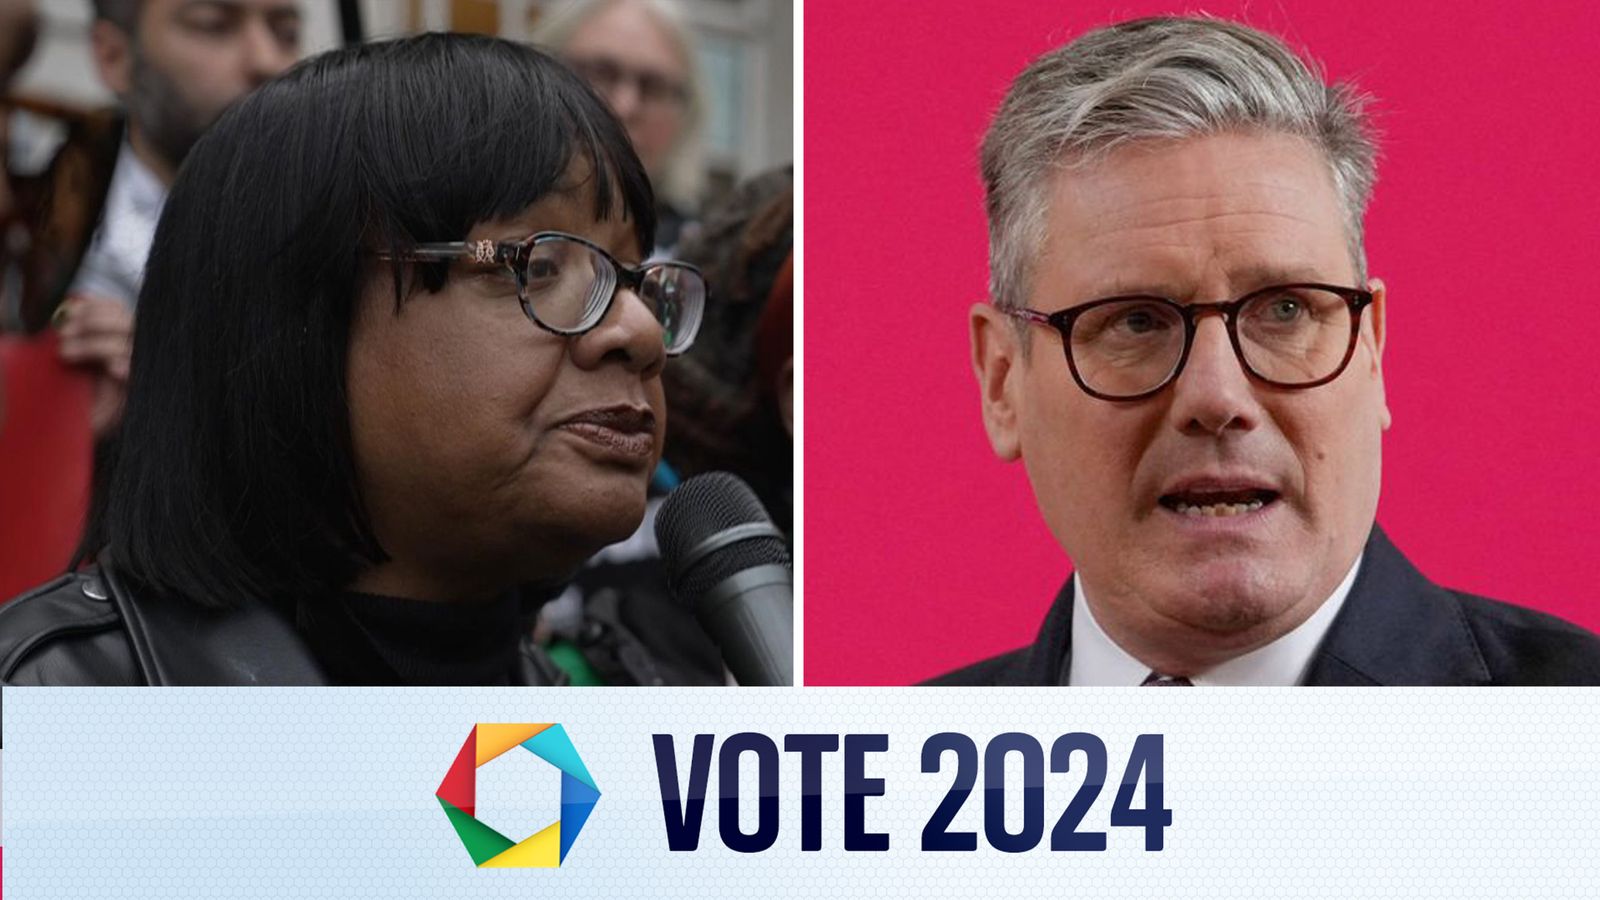 General election latest: Diane Abbott releases statement after Keir Starmer says she’s ‘free’ to stand as Labour candidate